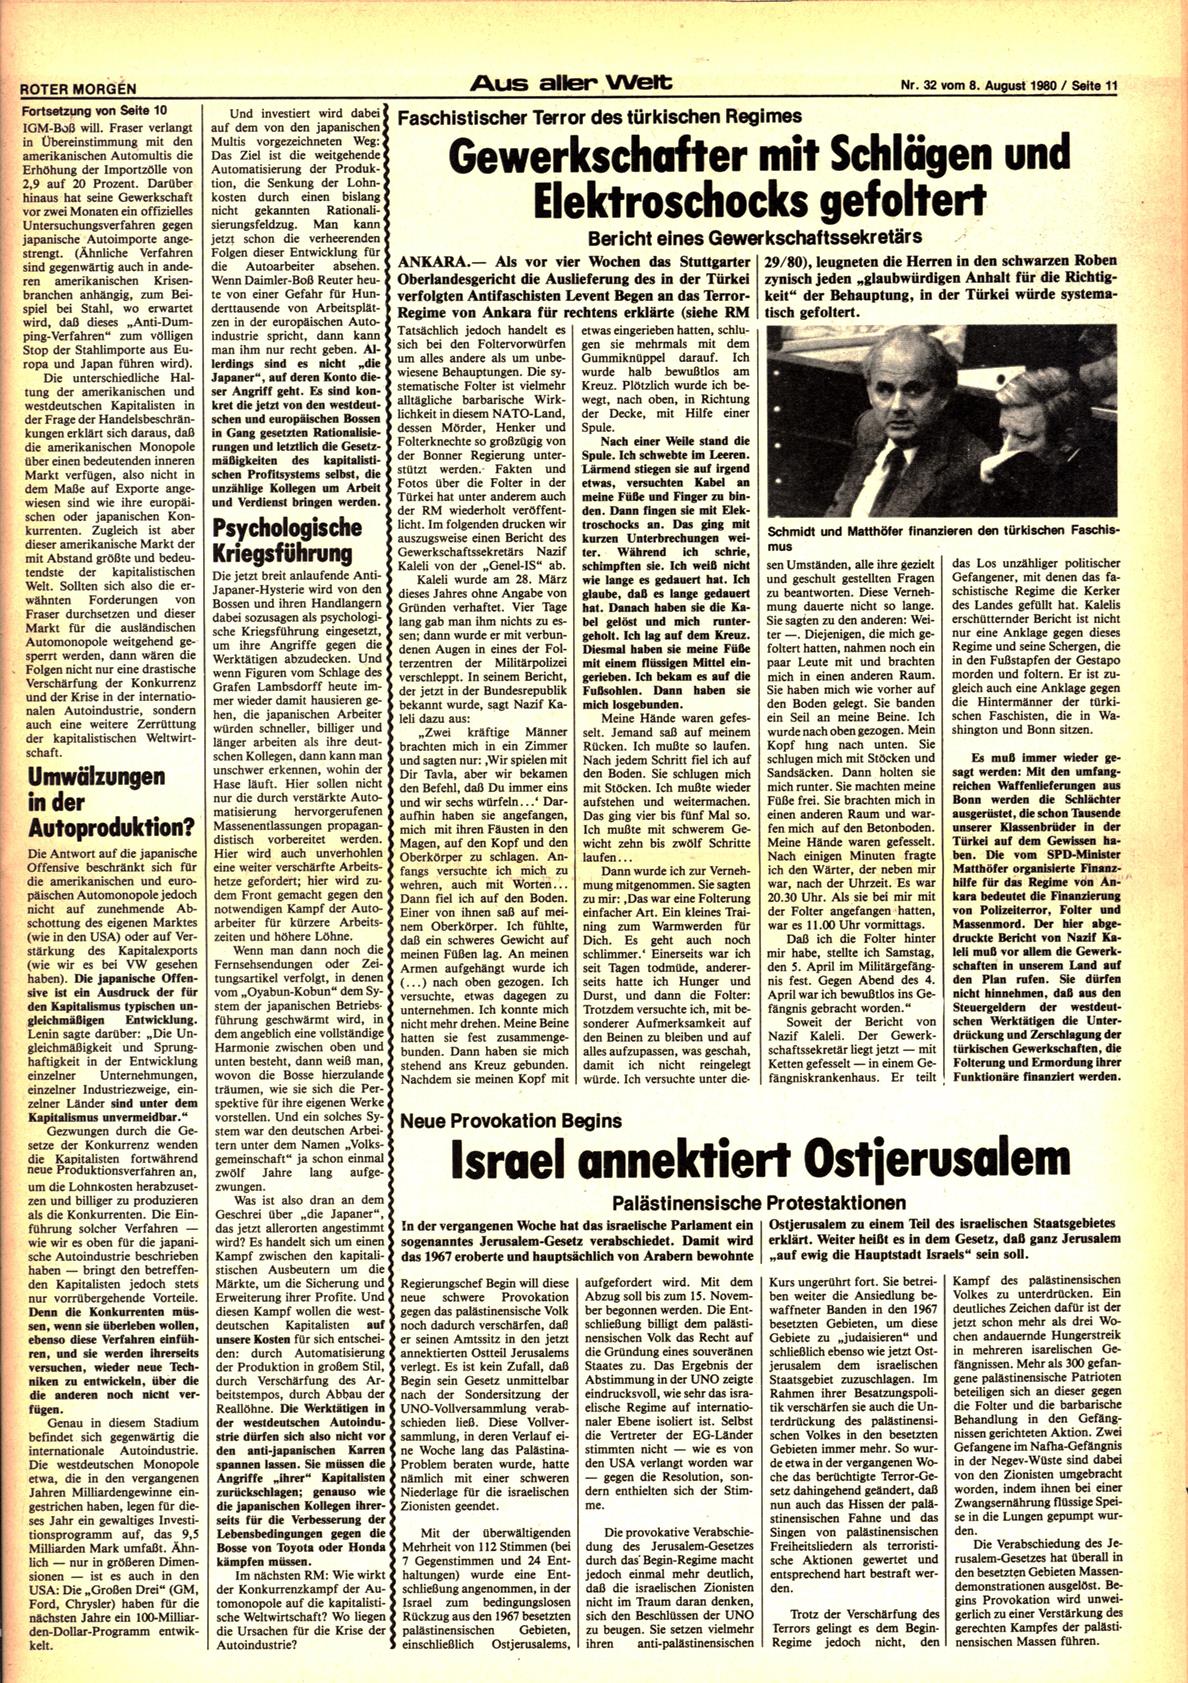 Roter Morgen, 14. Jg., 8. August 1980, Nr. 32, Seite 11